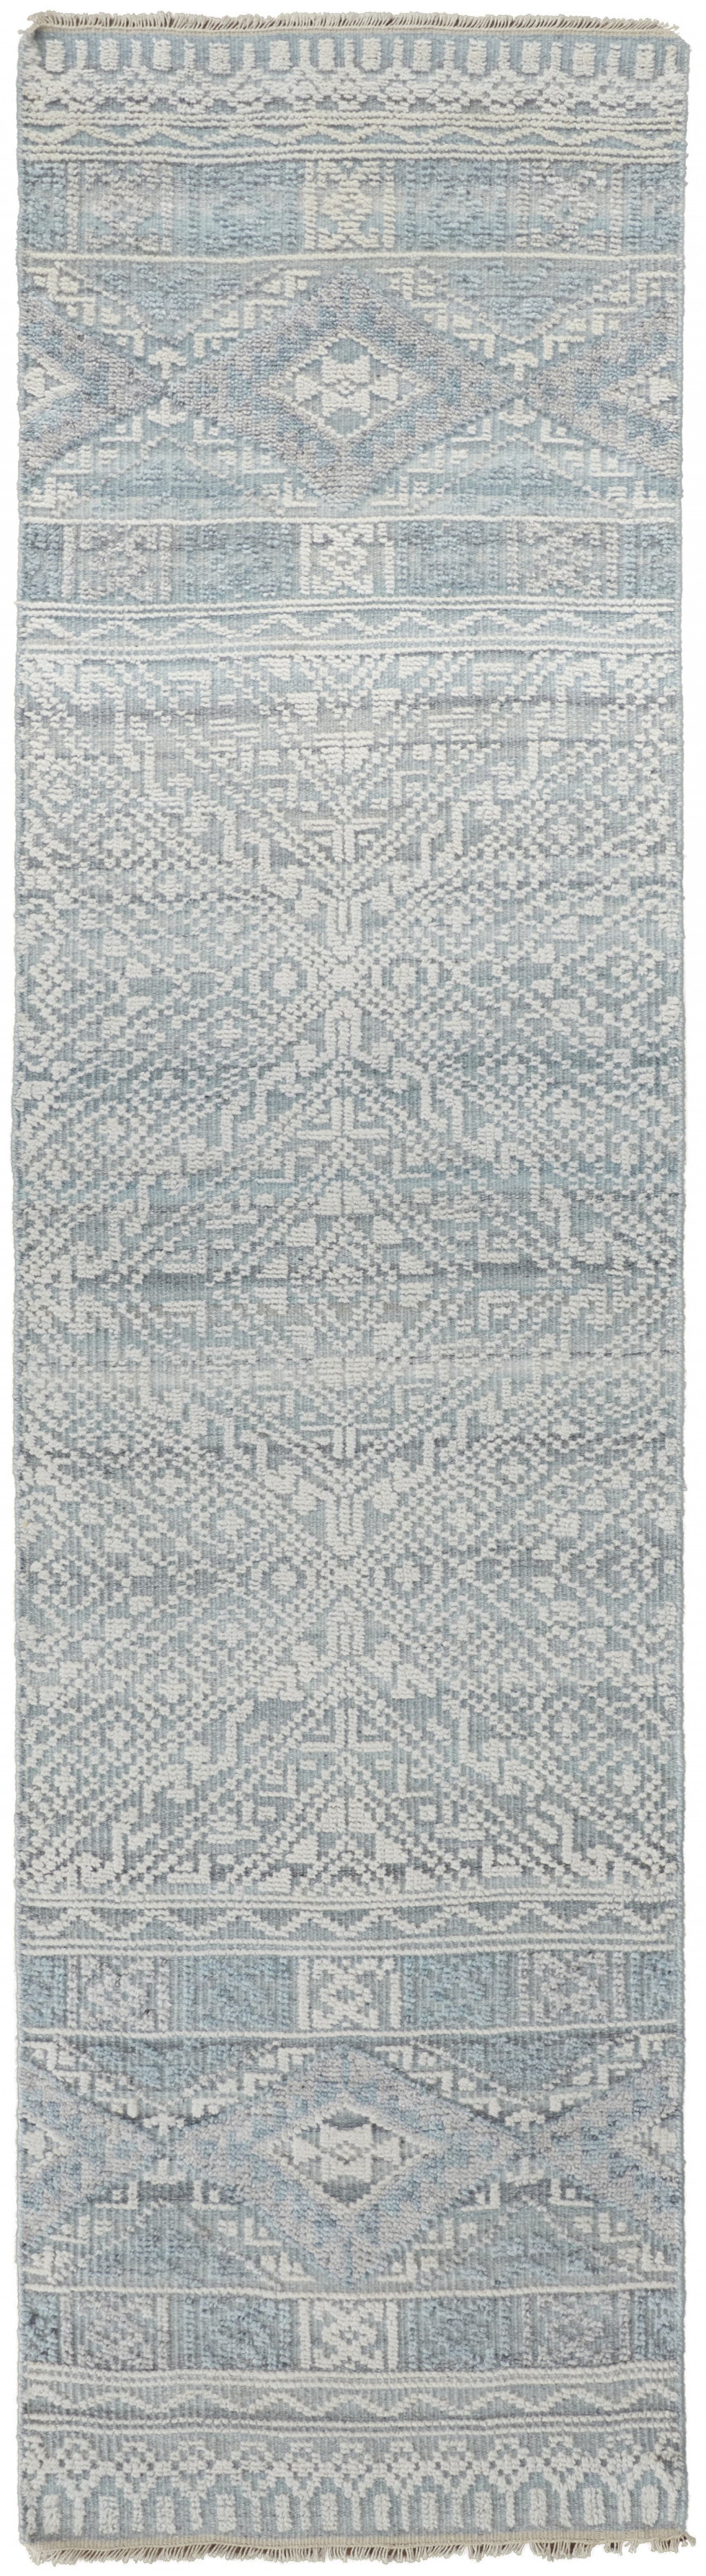 8' X 10' Gray Ivory And Blue Geometric Hand Knotted Area Rug